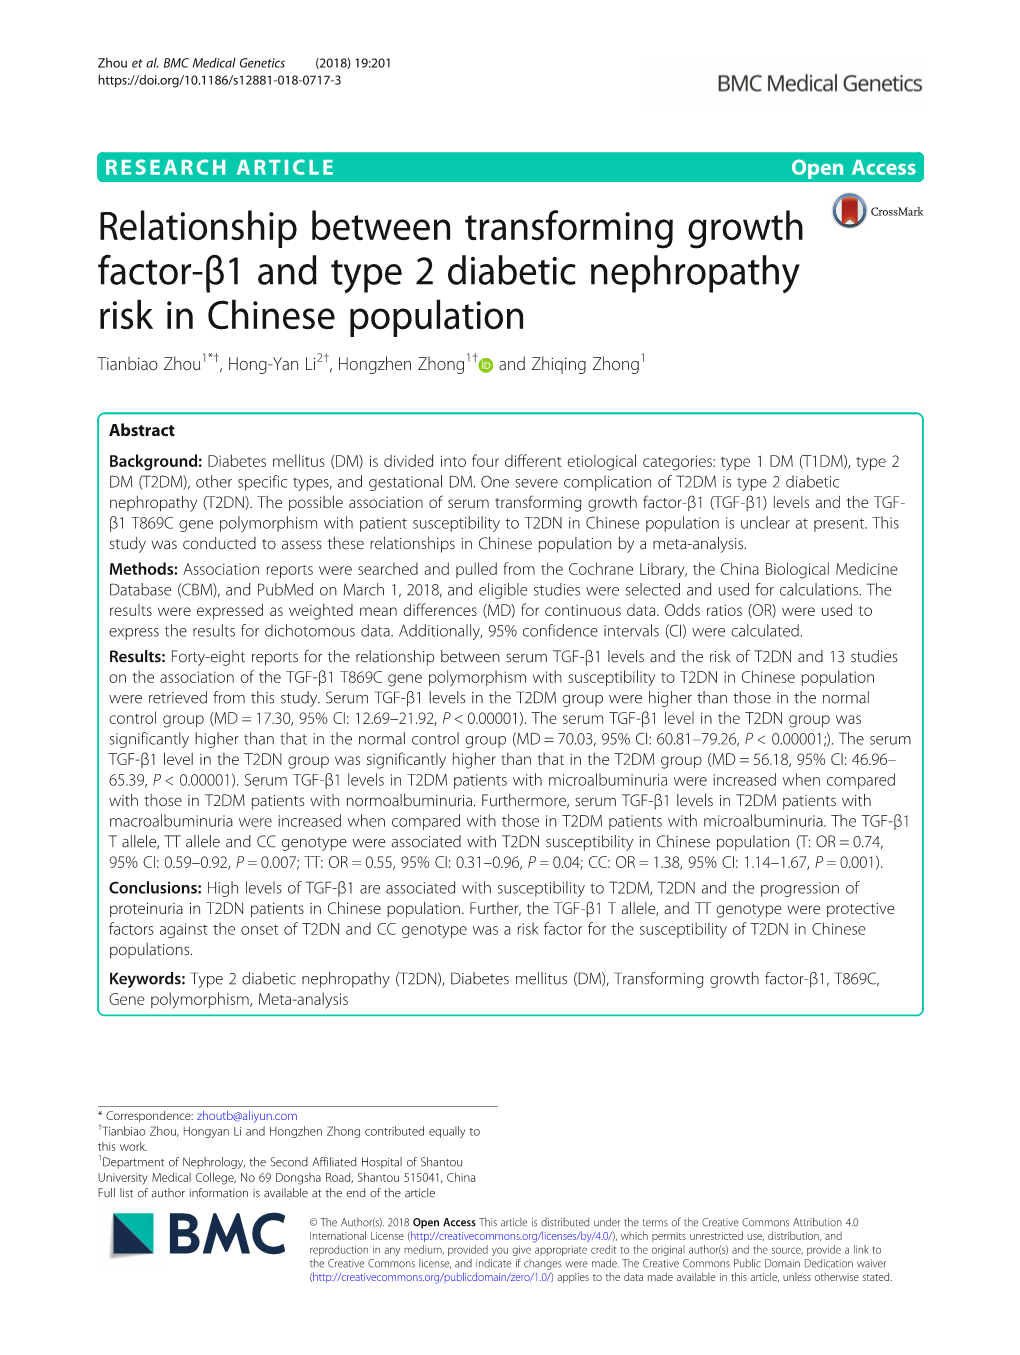 Relationship Between Transforming Growth Factor-Β1 and Type 2 Diabetic